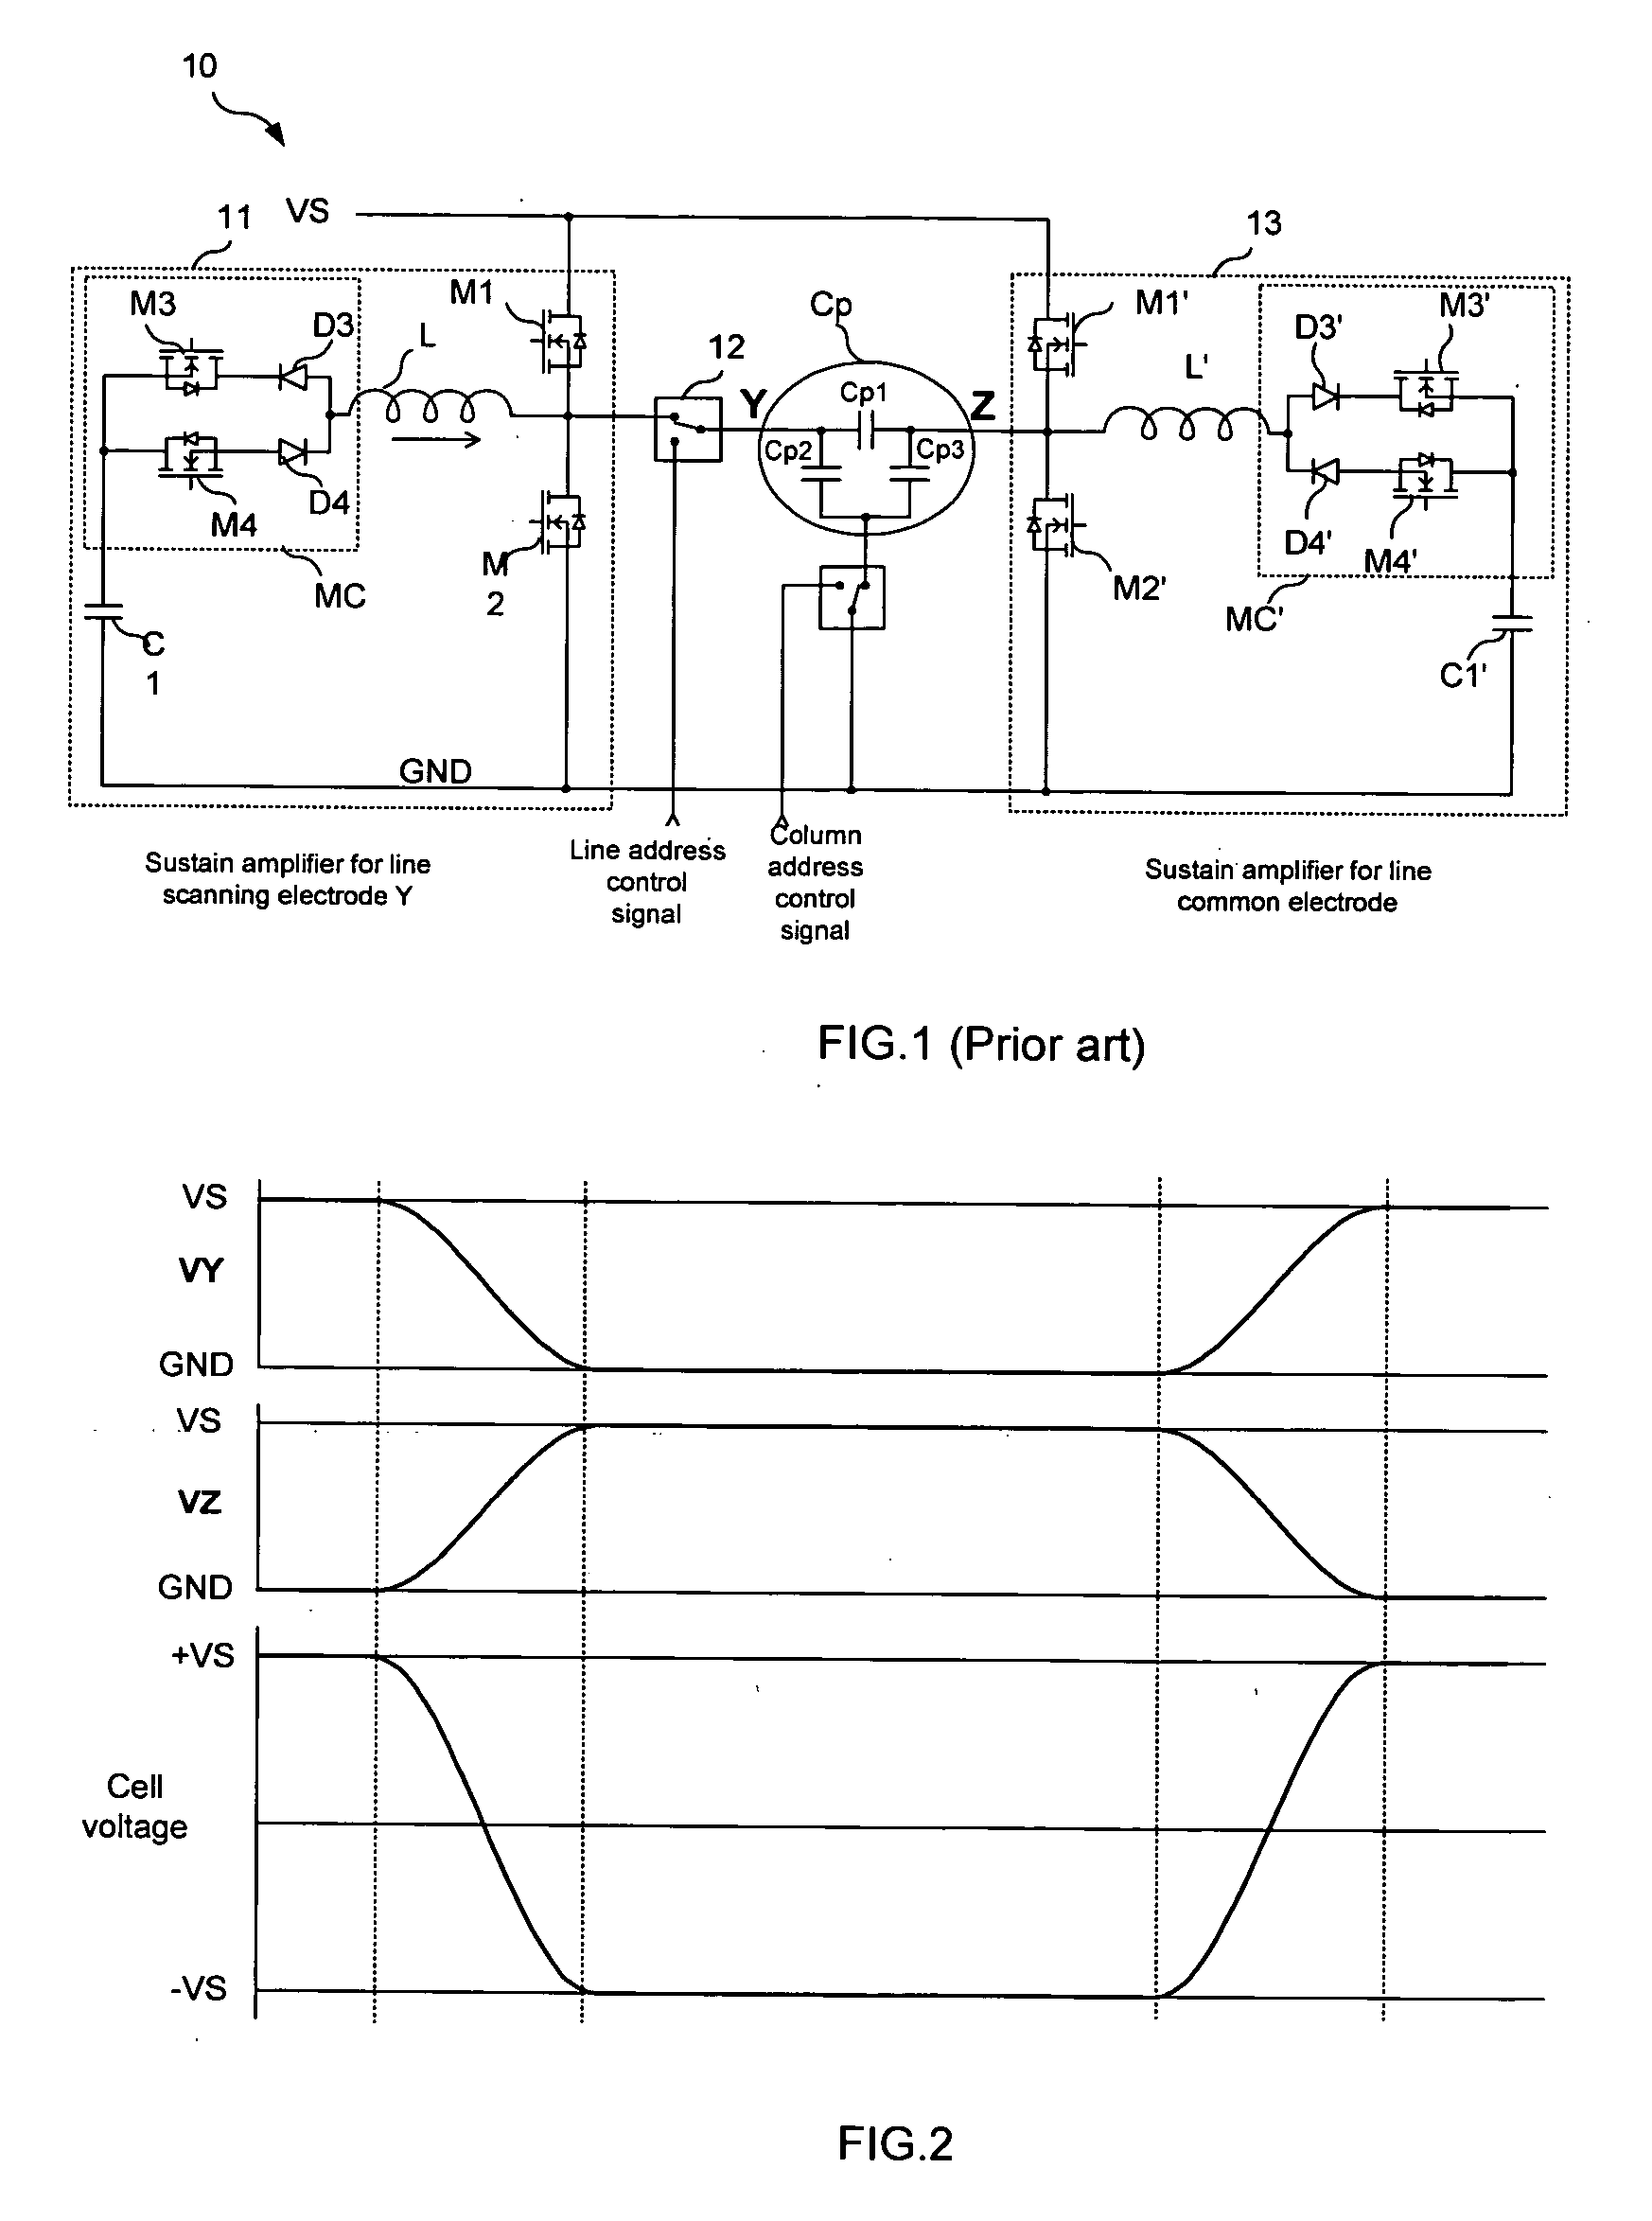 Amplifier designed to generate a rectangular voltage signal with soft switching on a capacitive load